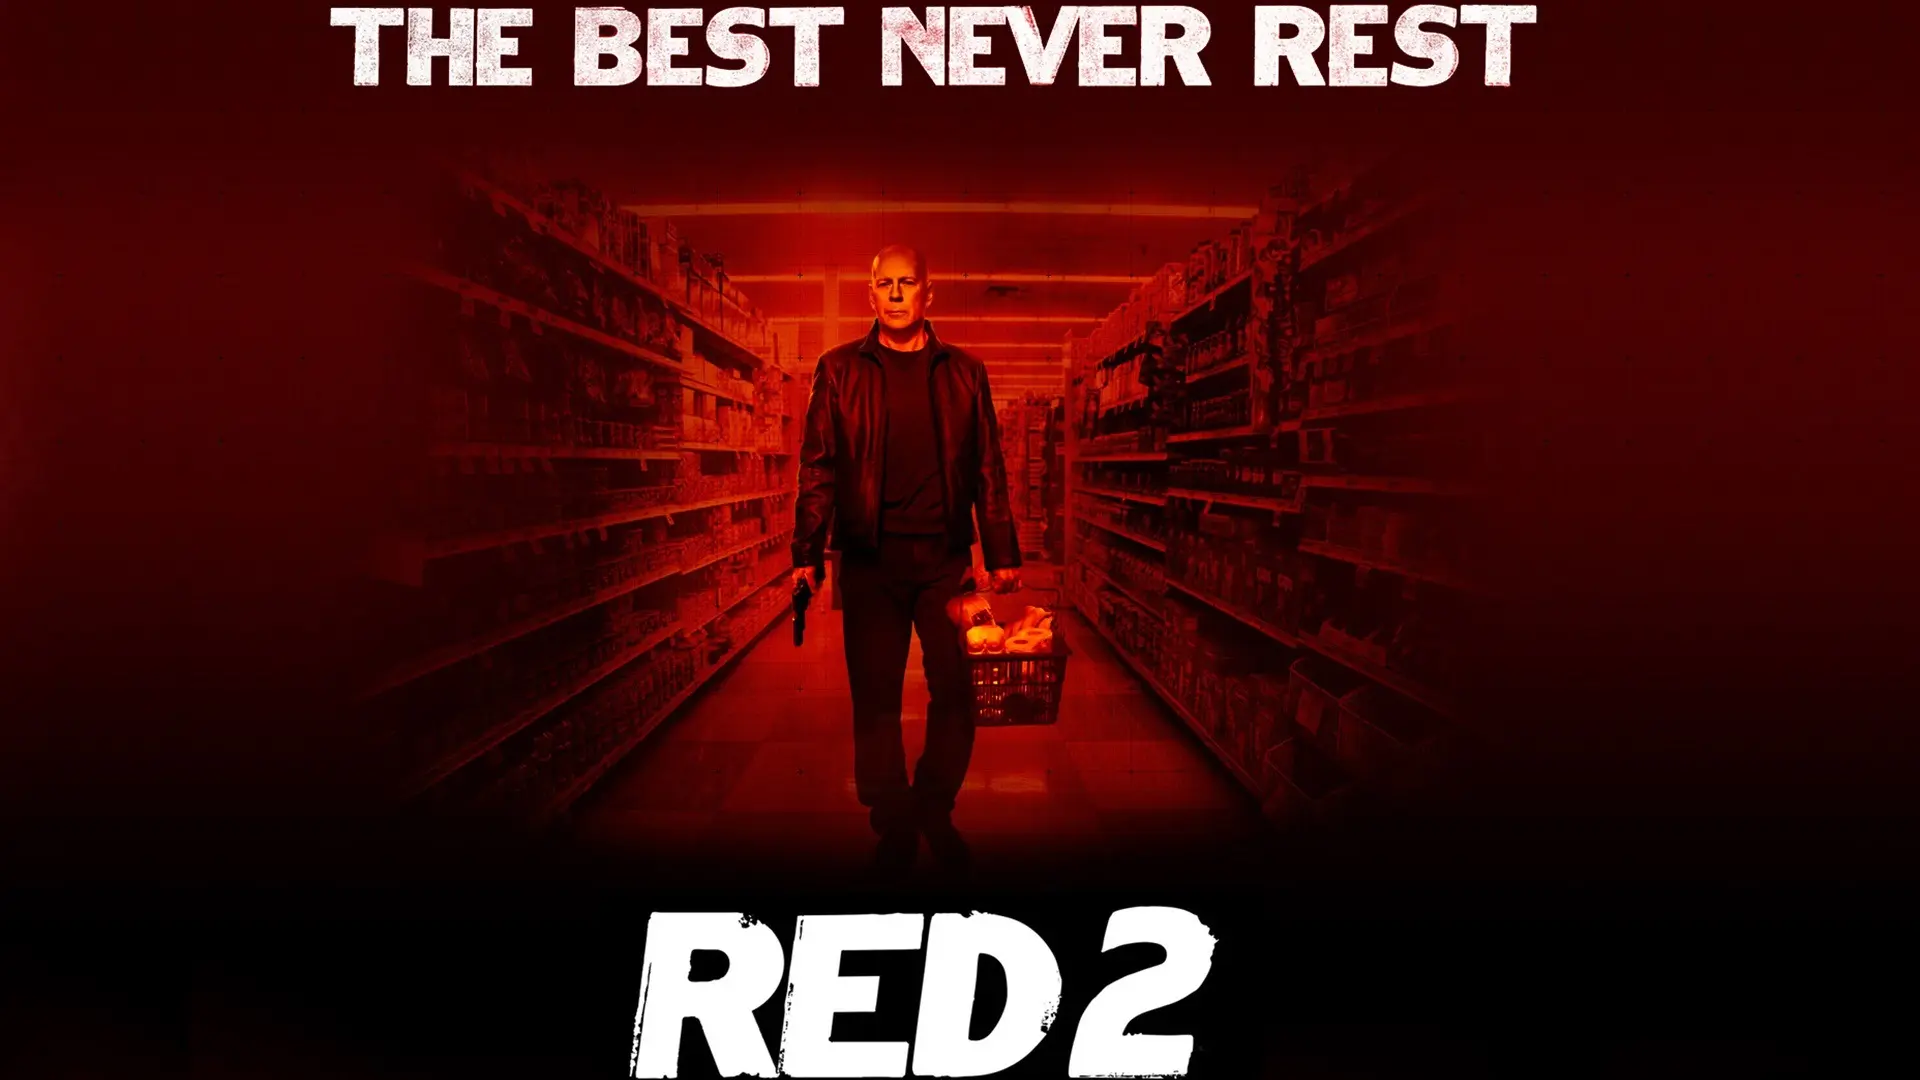 Movie Red 2 wallpaper 1 | Background Image